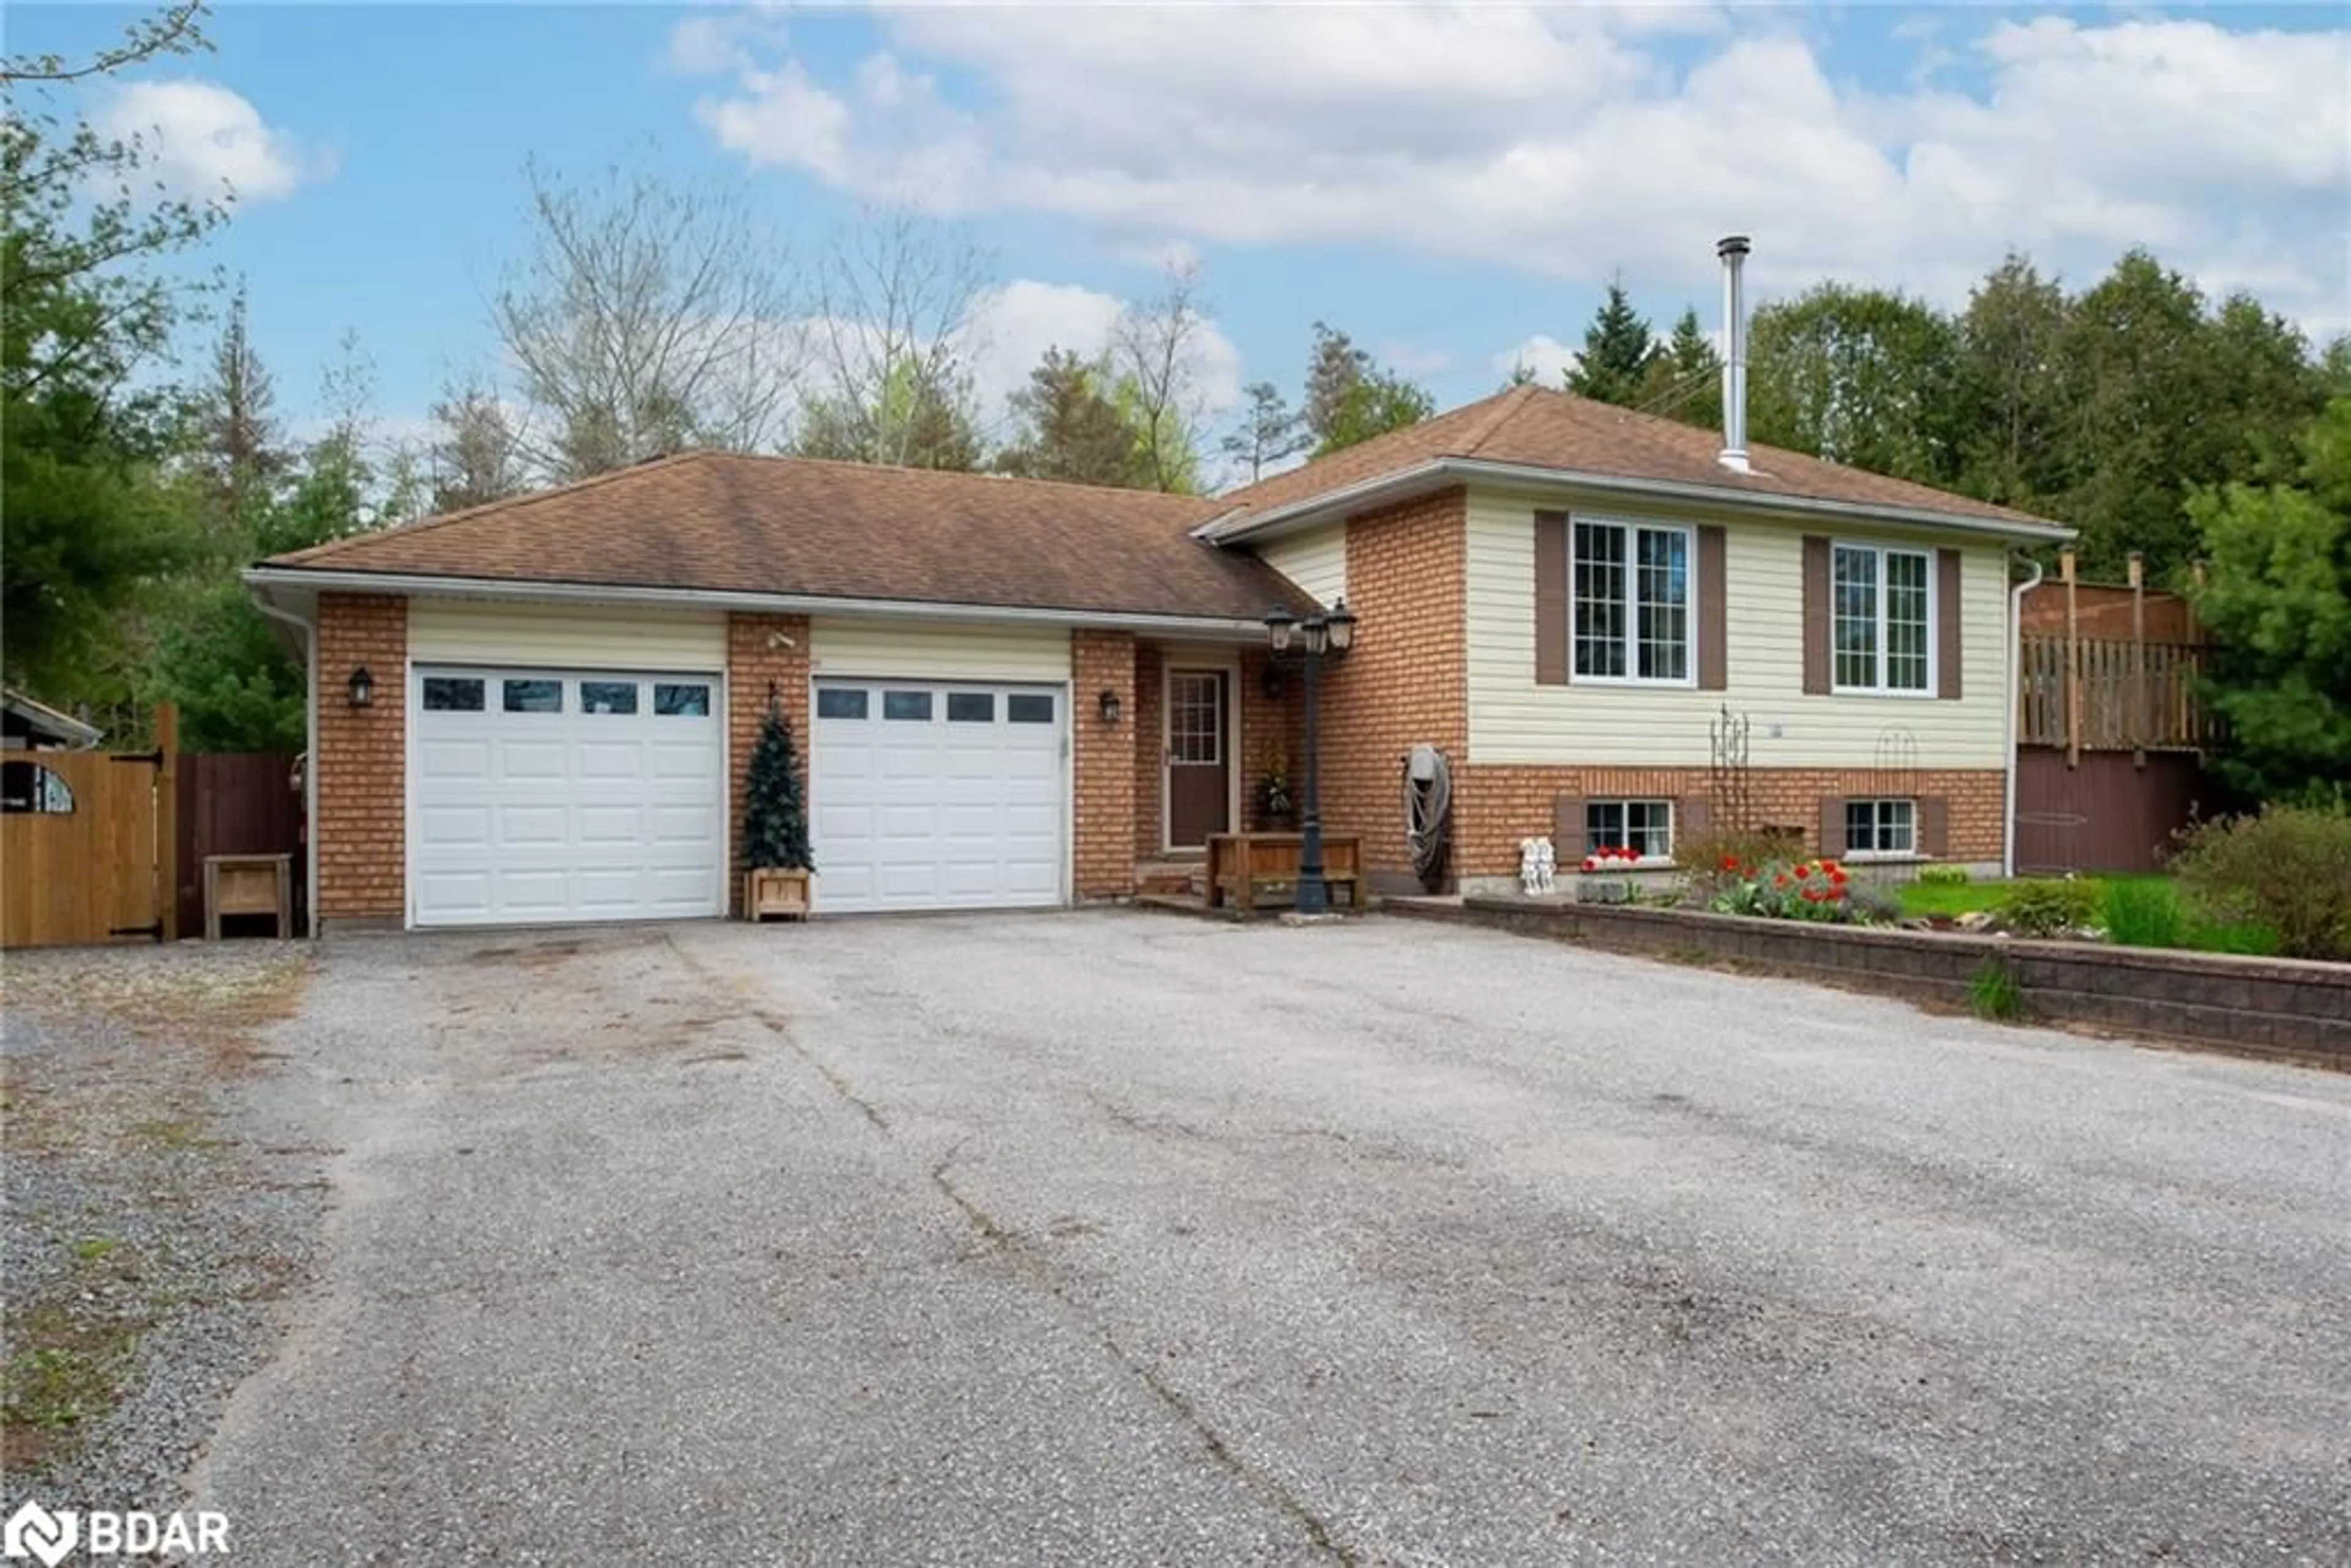 Frontside or backside of a home for 4925 Concession 2 Sunnidale Rd, New Lowell Ontario L0M 1N0